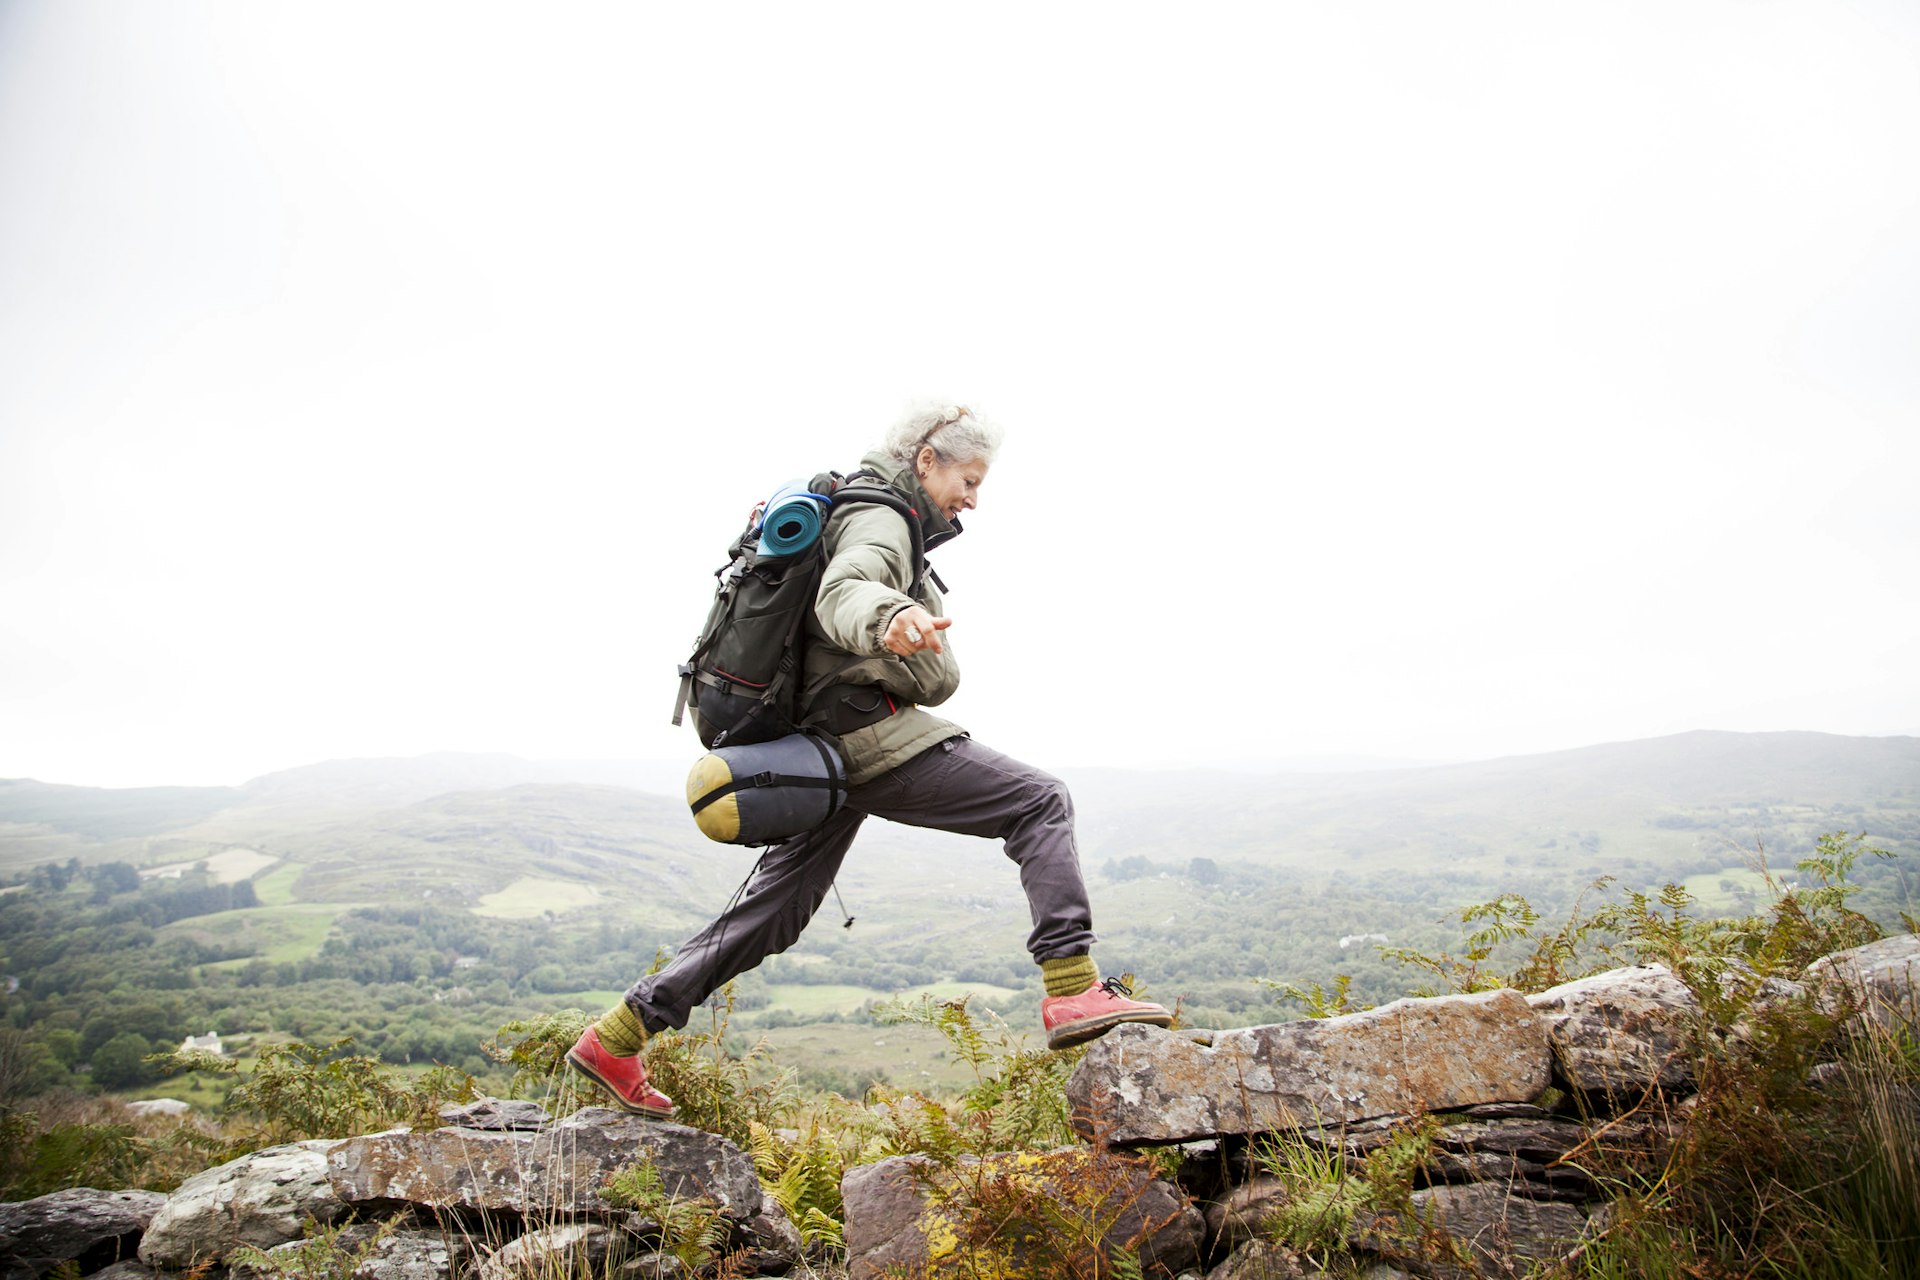 An older woman jumps across rocsk in the mountains of Ireland